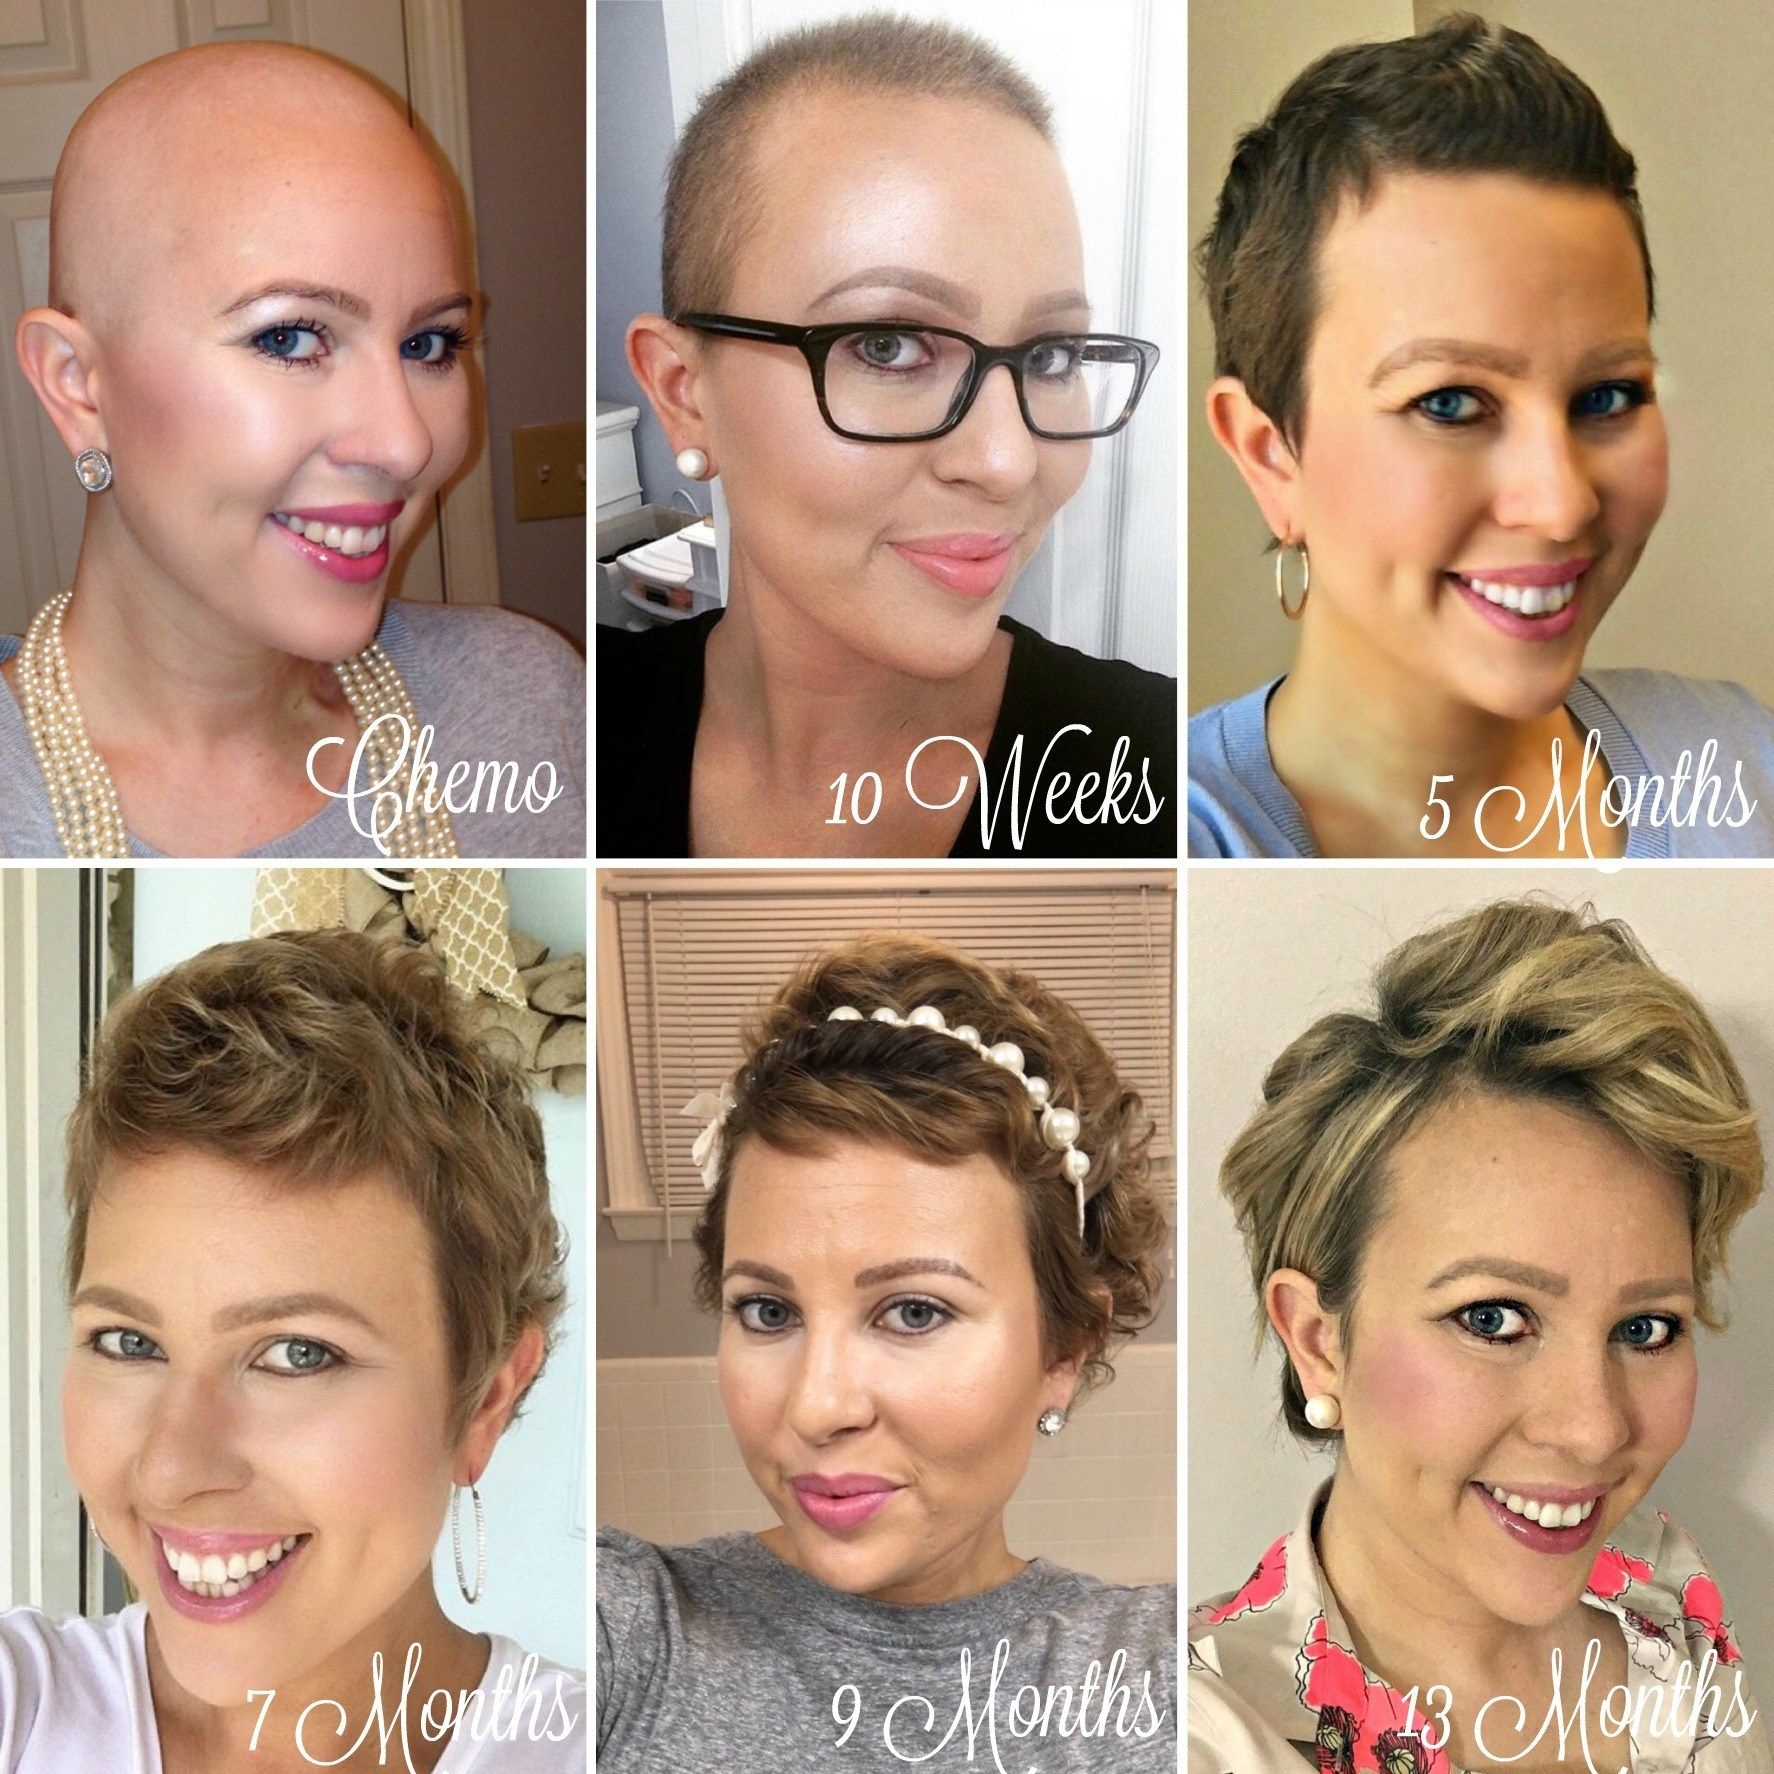 Chemo Regrowth: How To Style Your Short Hair | Hair Regrowth in Cancer Patients Short Hair Cuts